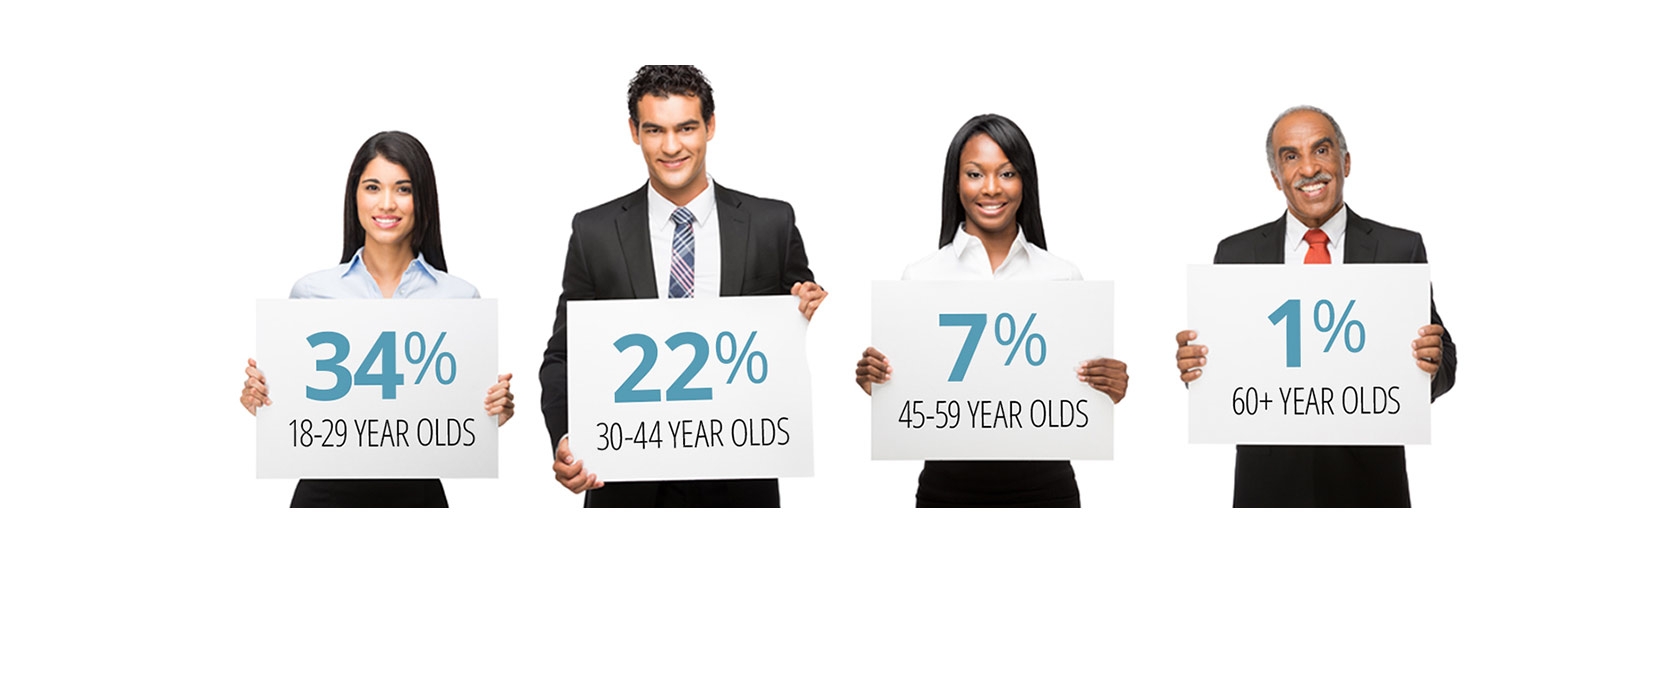 4 people hold up signs indicating the percentage of loan debt for each age group. 34% 18-29 year olds. 22% 30-44 year olds. 7% 45-49 year olds. 1% 60 plus year olds.